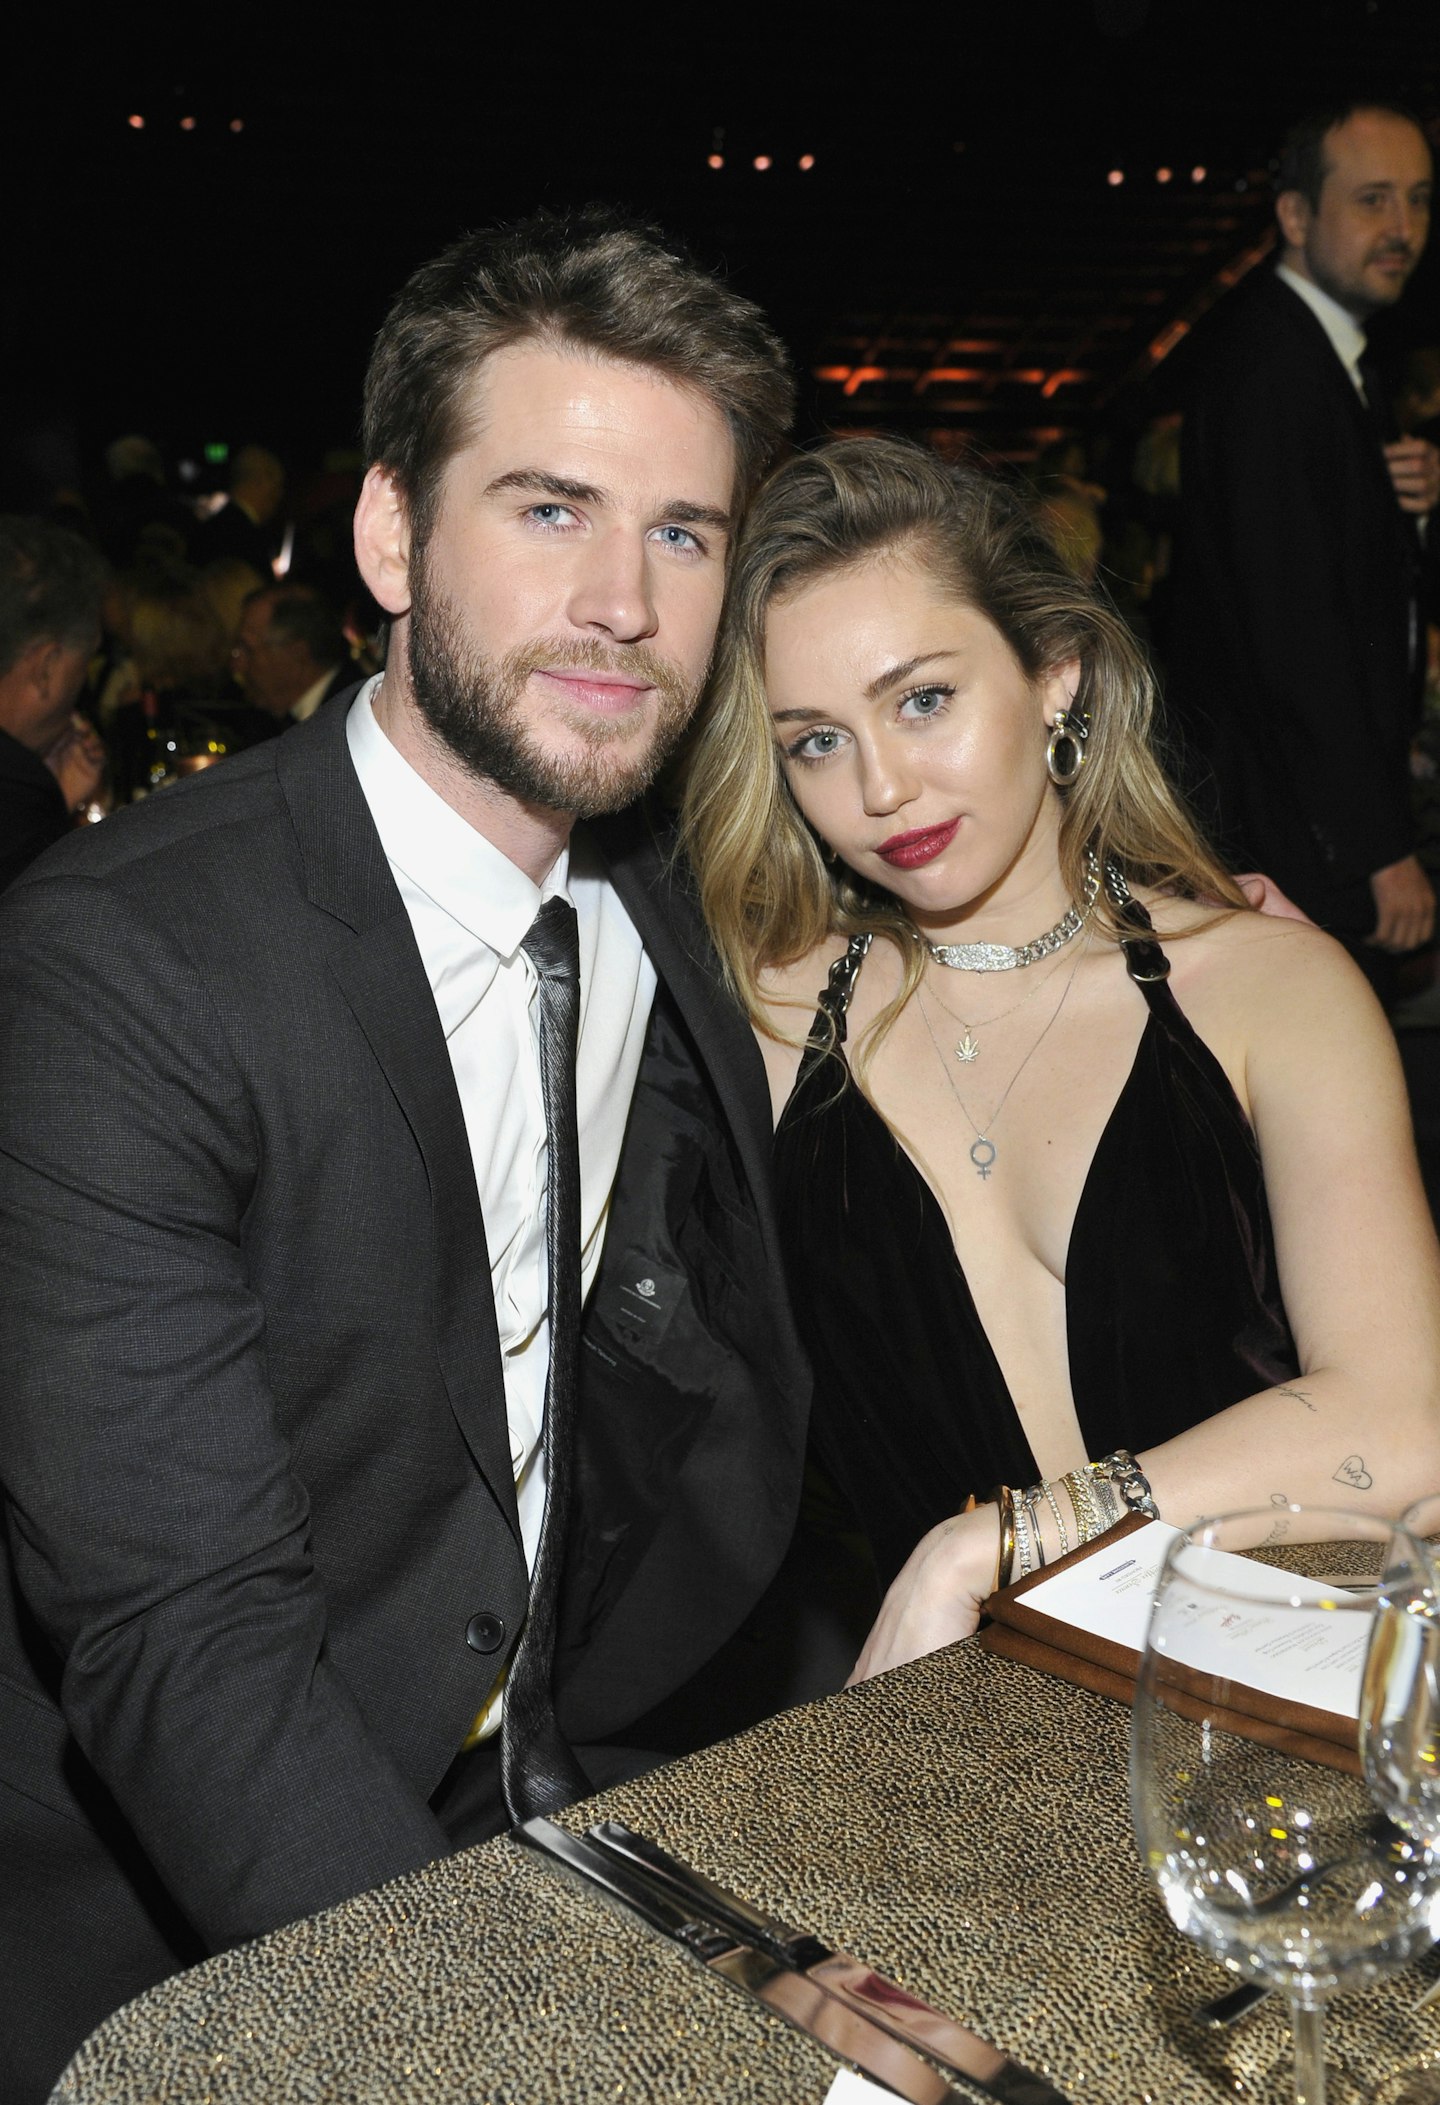 Miley Cyrus and Liam Hemsworth at dinner 